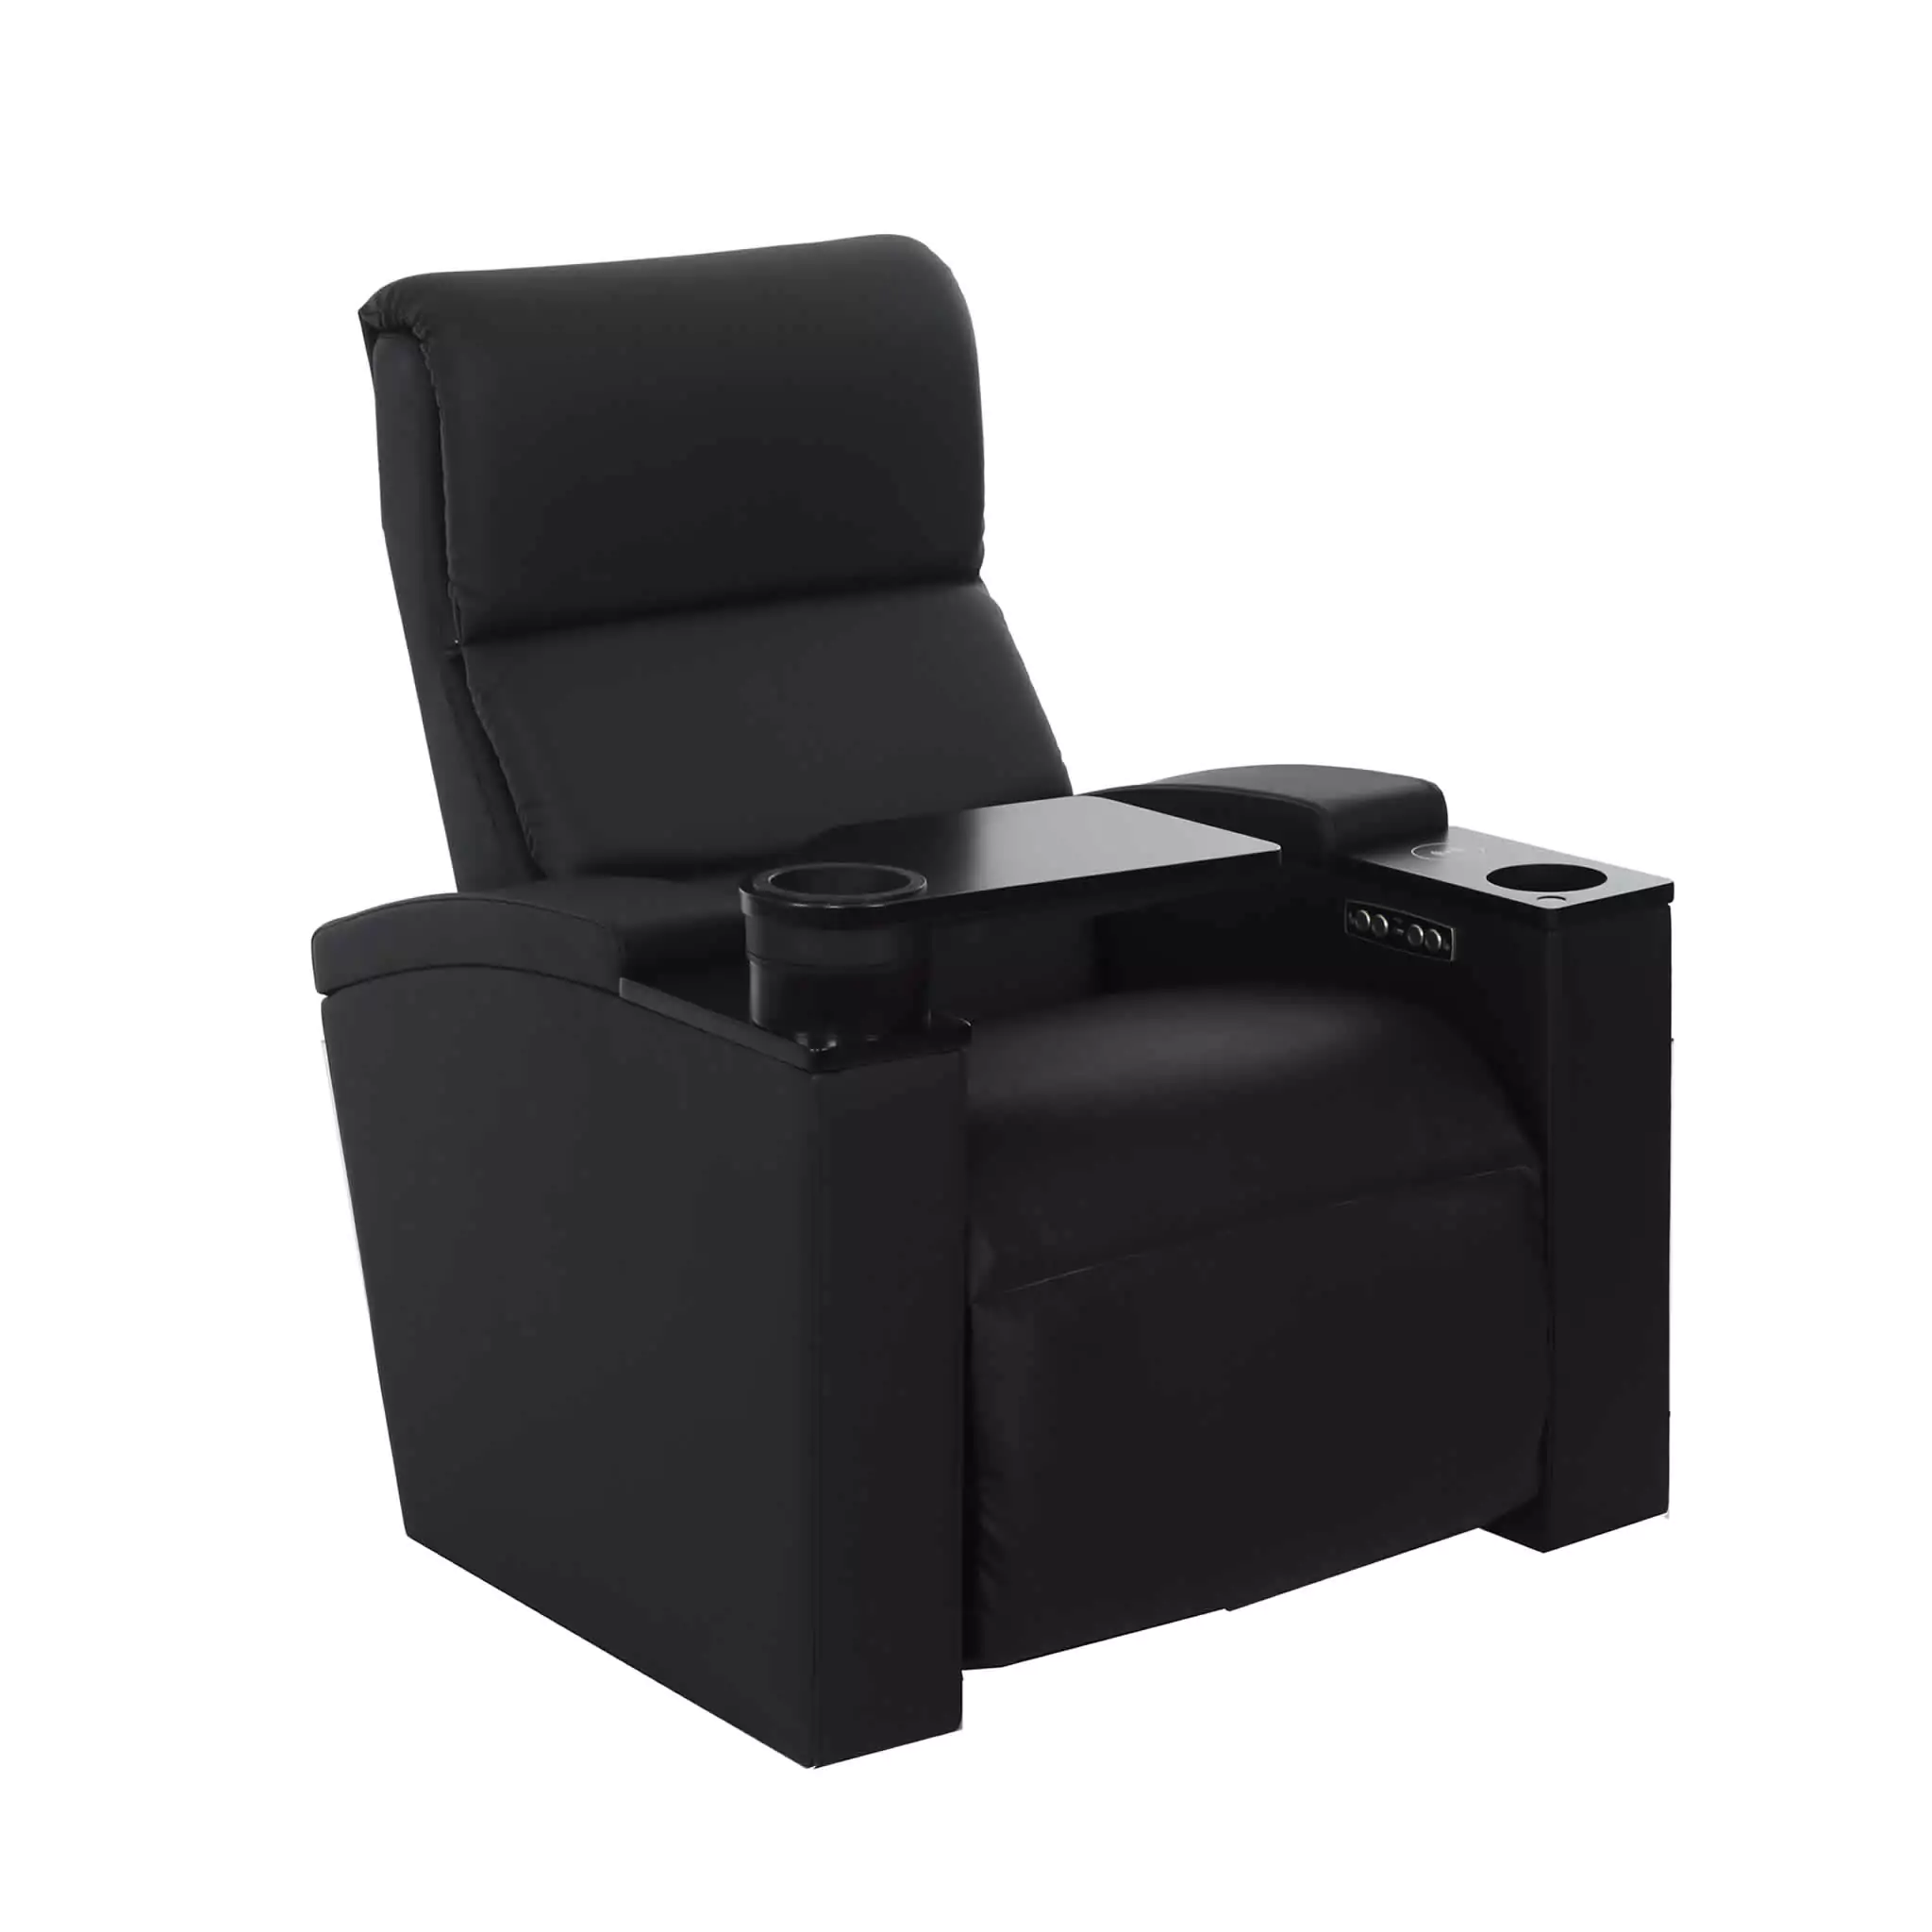 Simko Seating Products Recliner Cinema Seat Monstone Classic